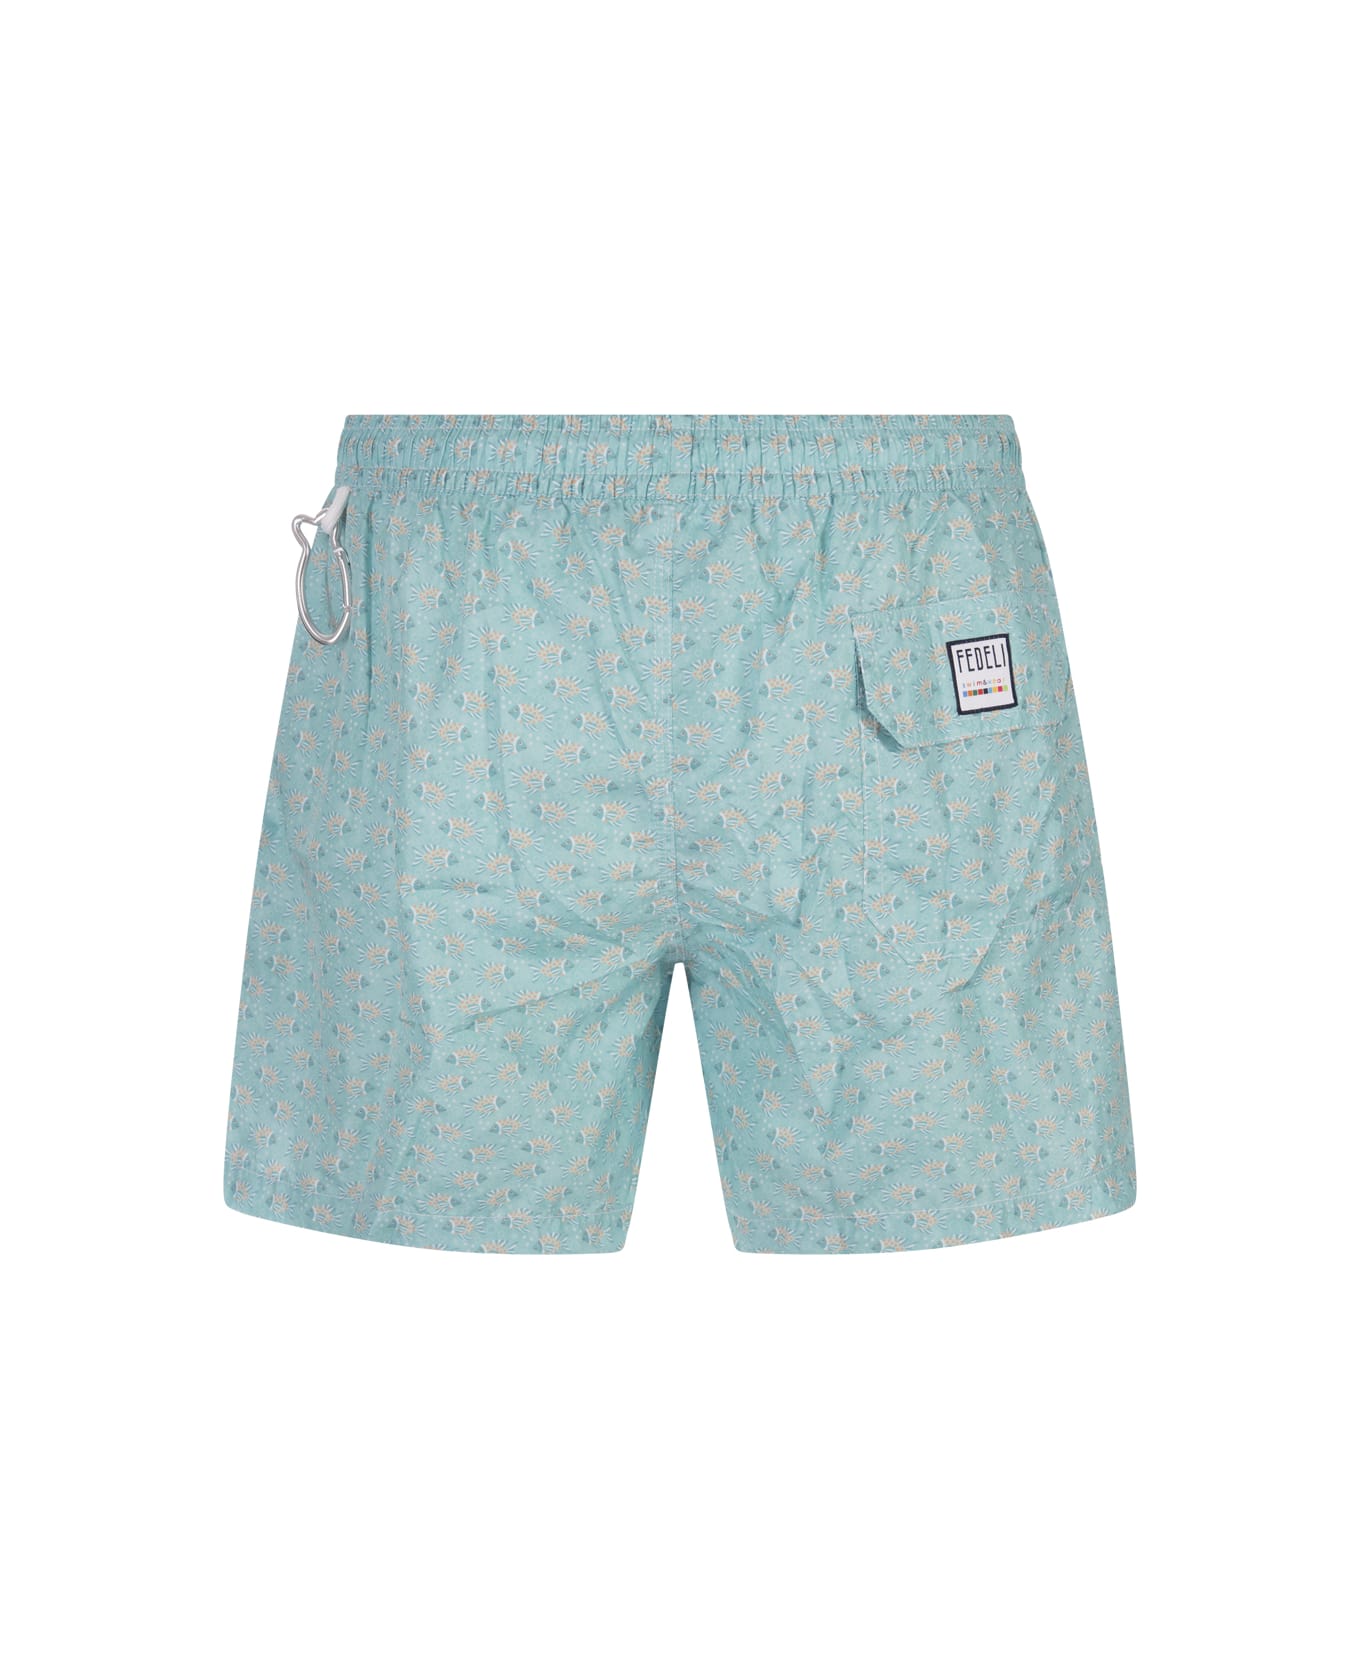 Fedeli Turquoise Swim Shorts With Fish Pattern - Green